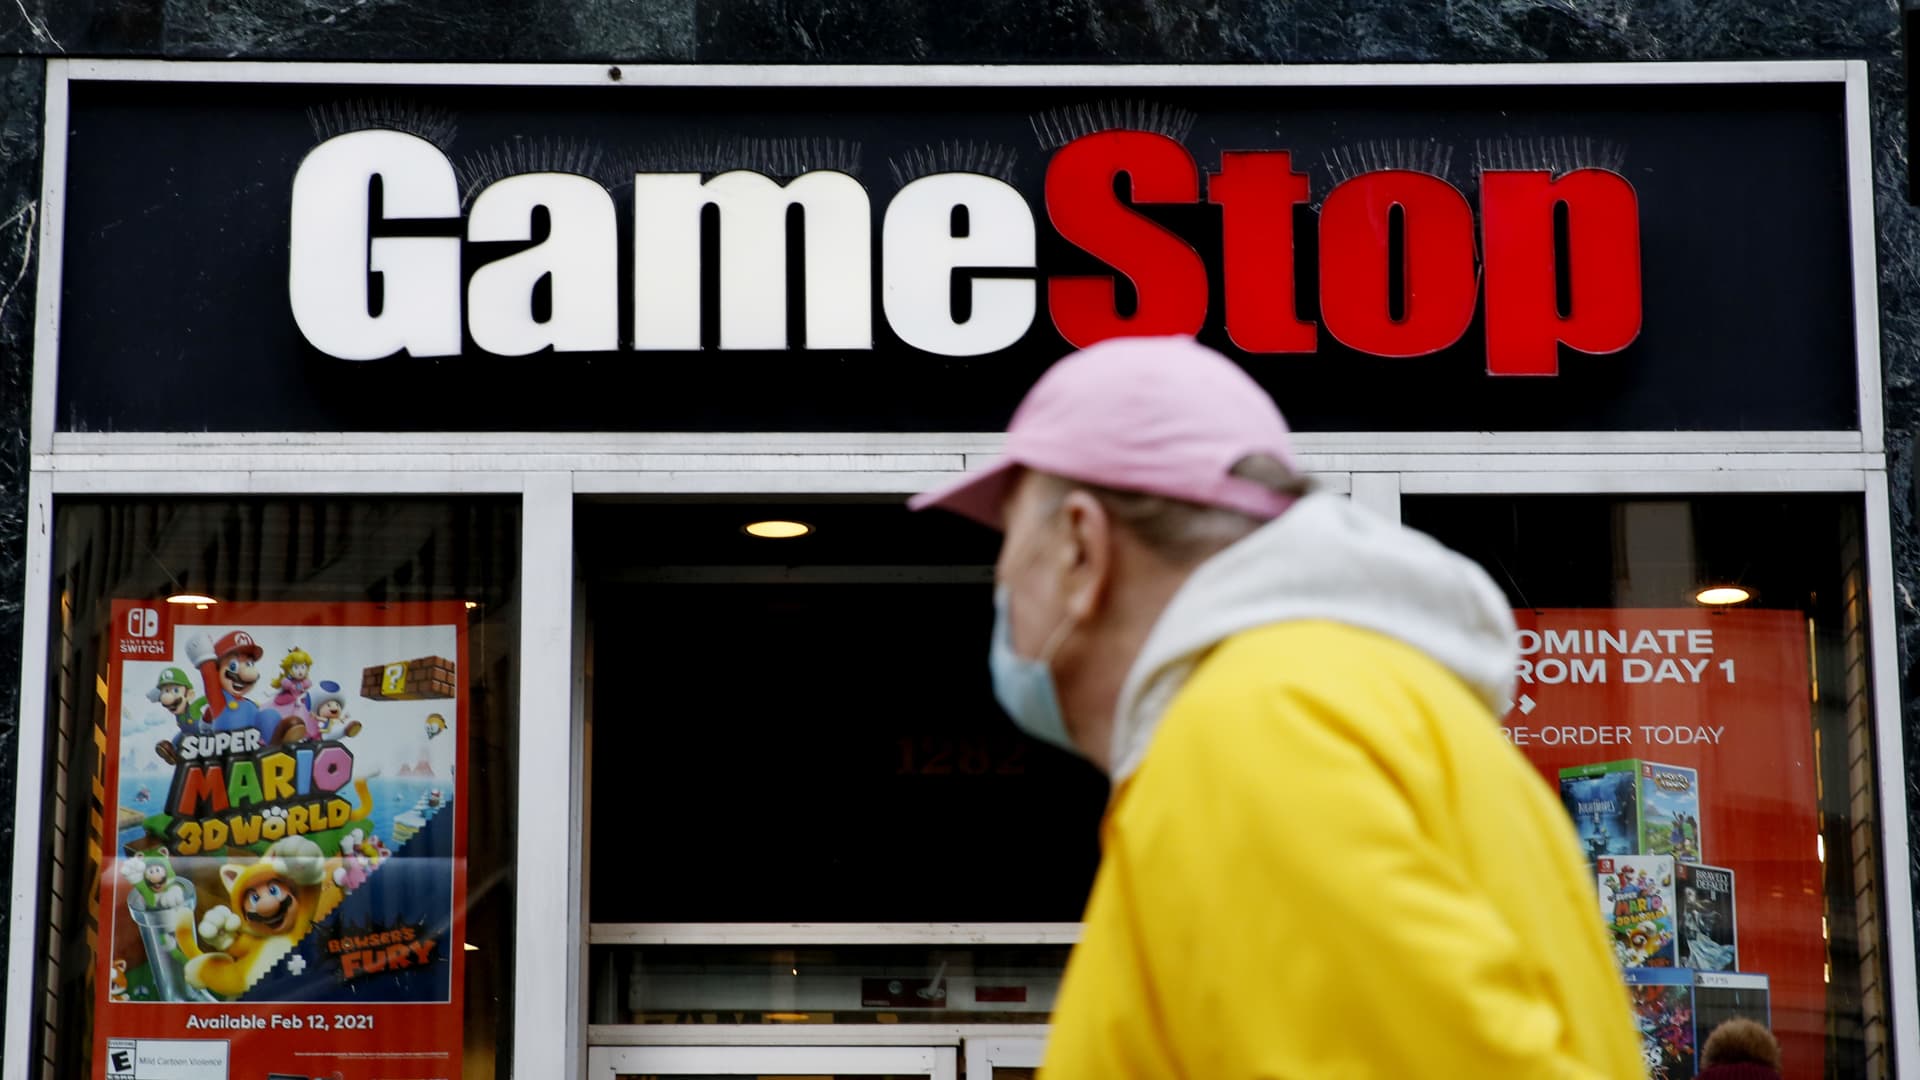 GameStop adding NFT trading cards to loyalty program perks as it deepens push into digital world